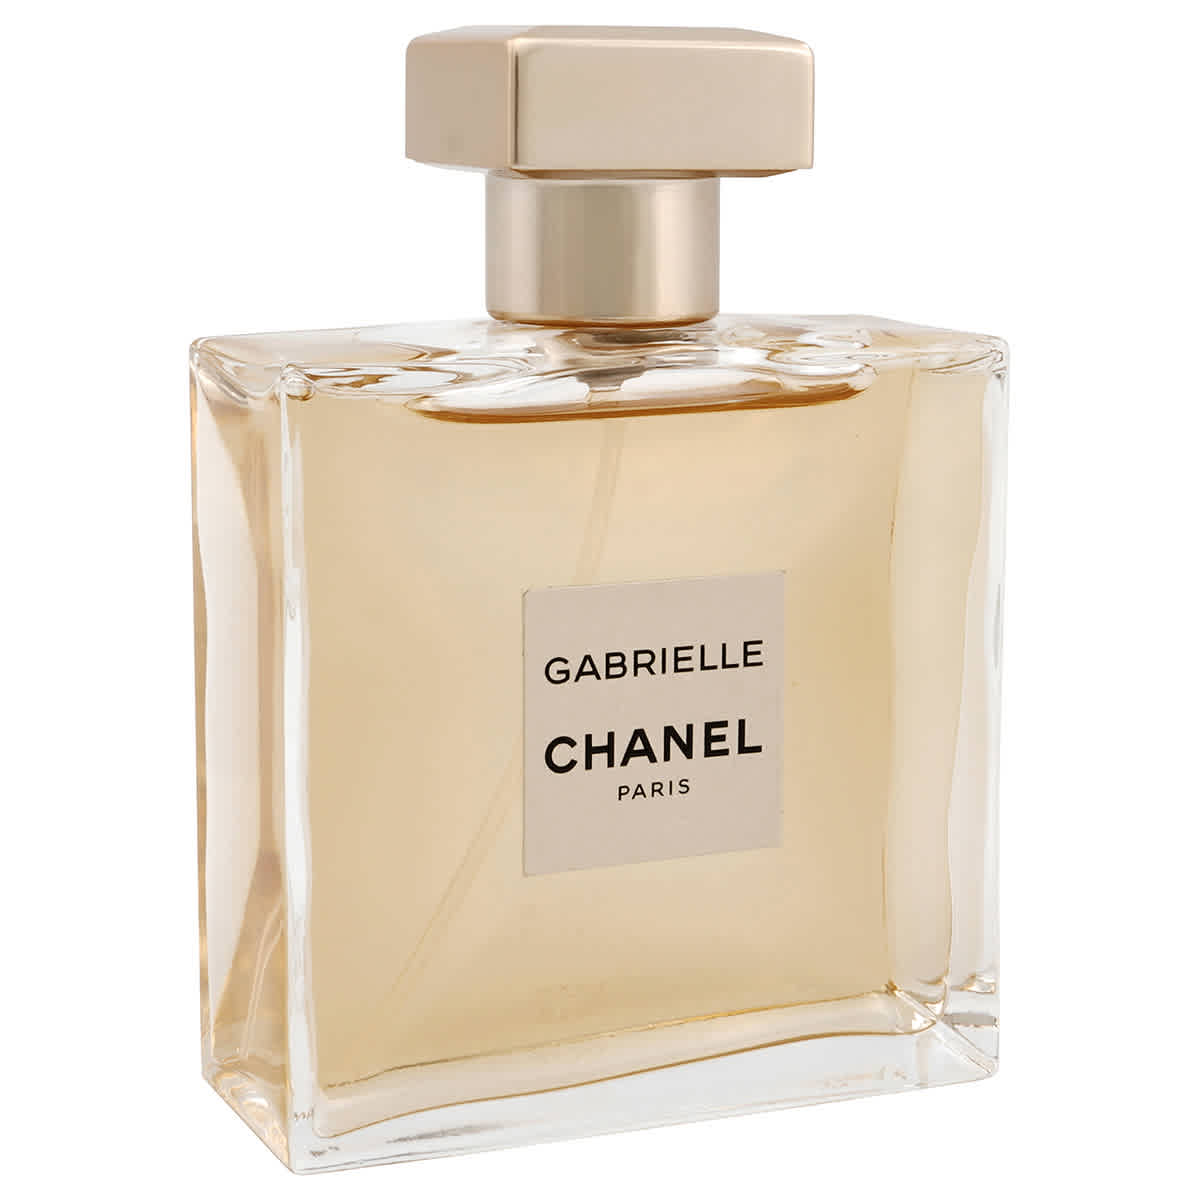 Up To 33% Off on Chanel Coco Mademoiselle 6.8